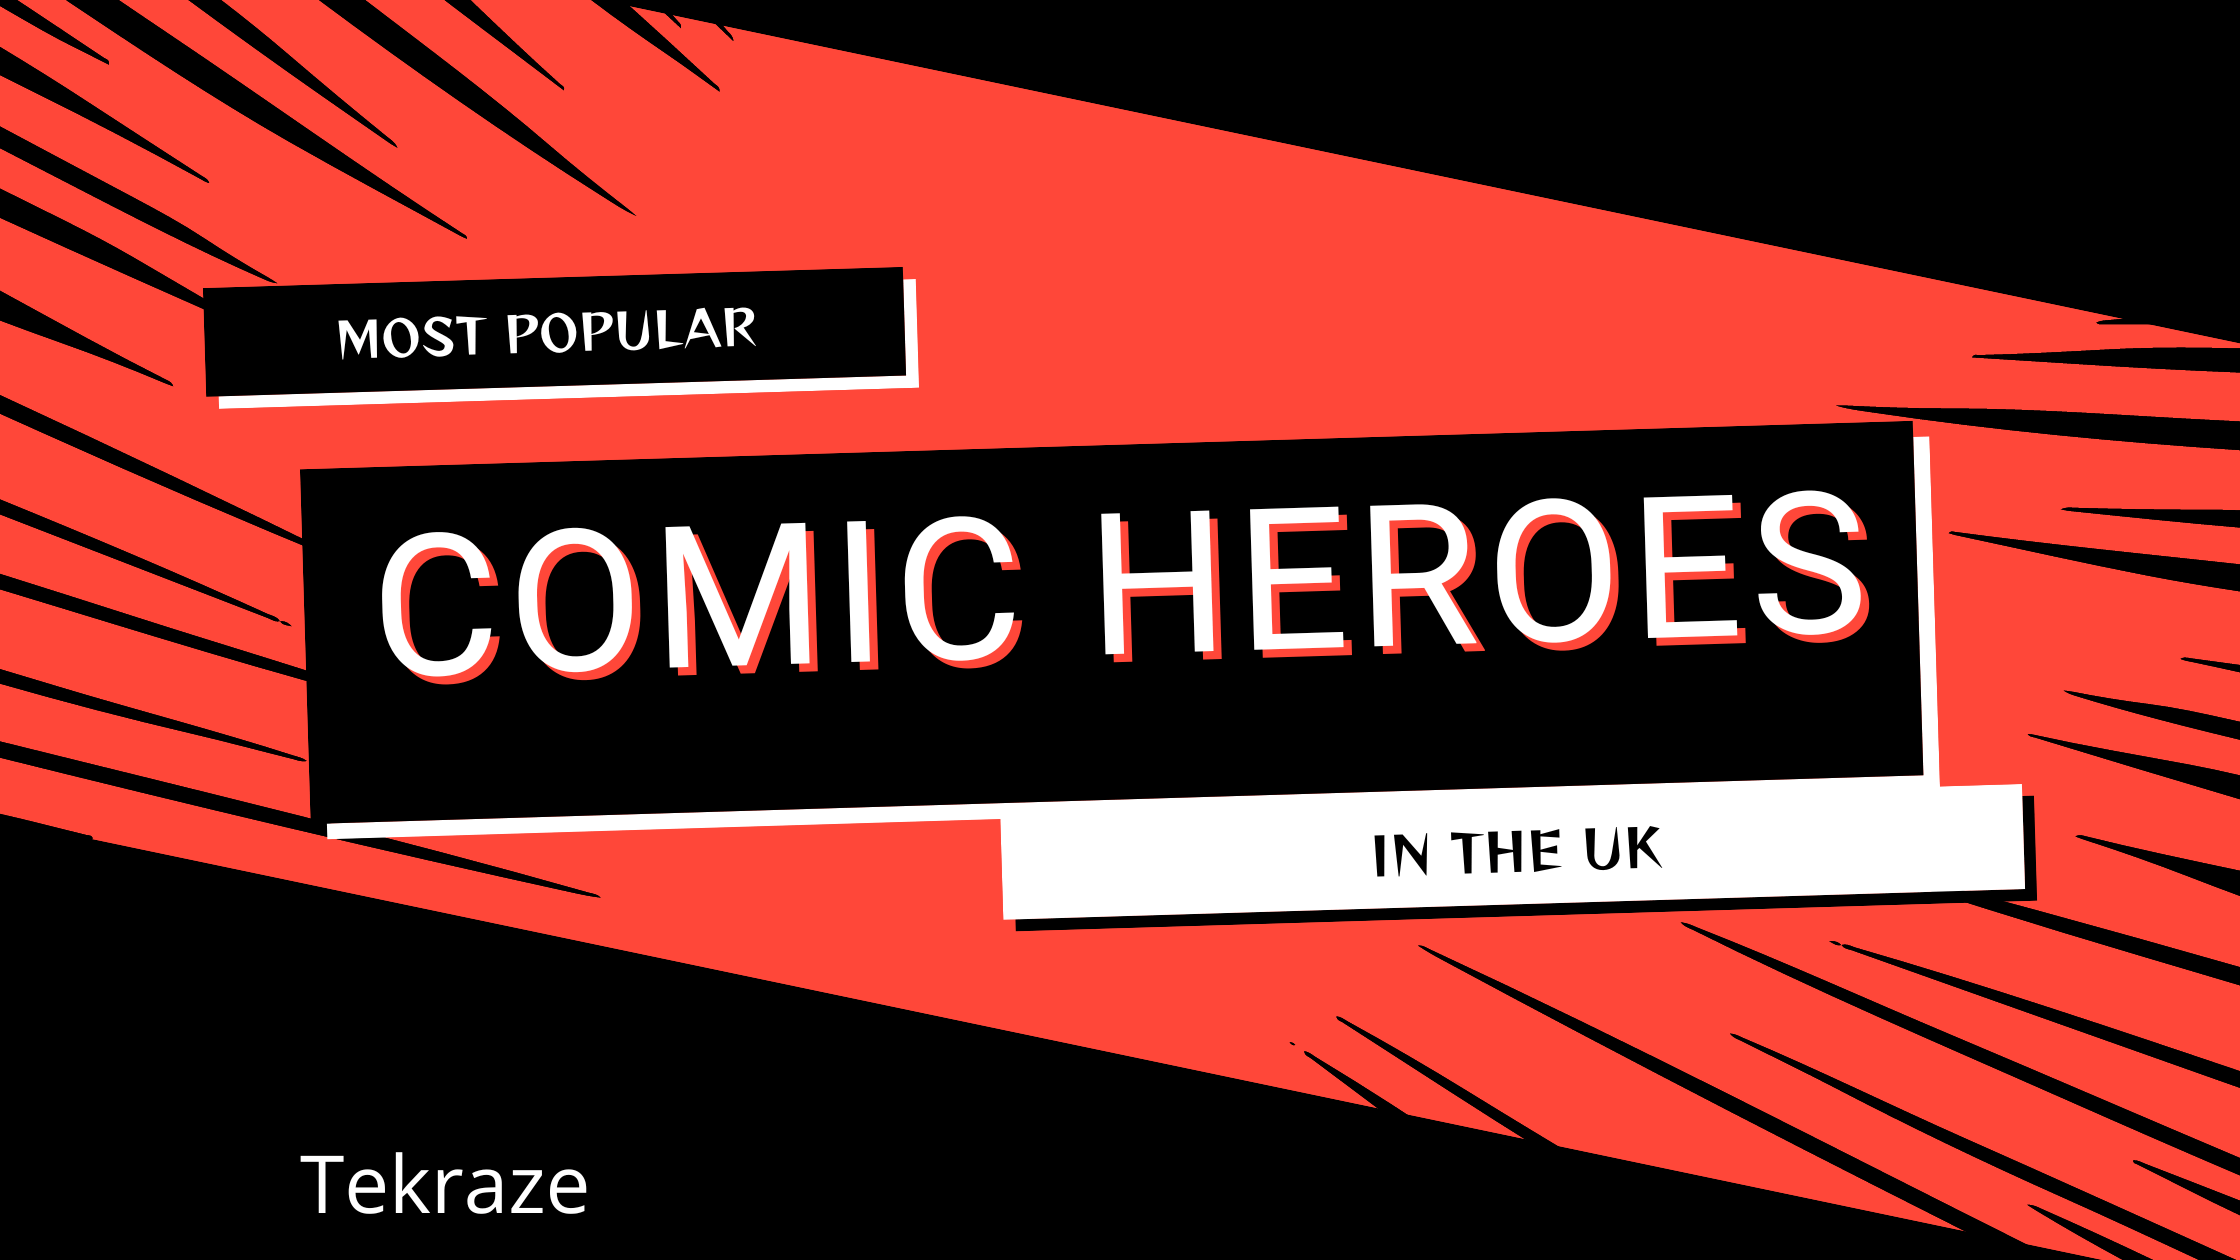 Most Popular Comic Heroes in the UK